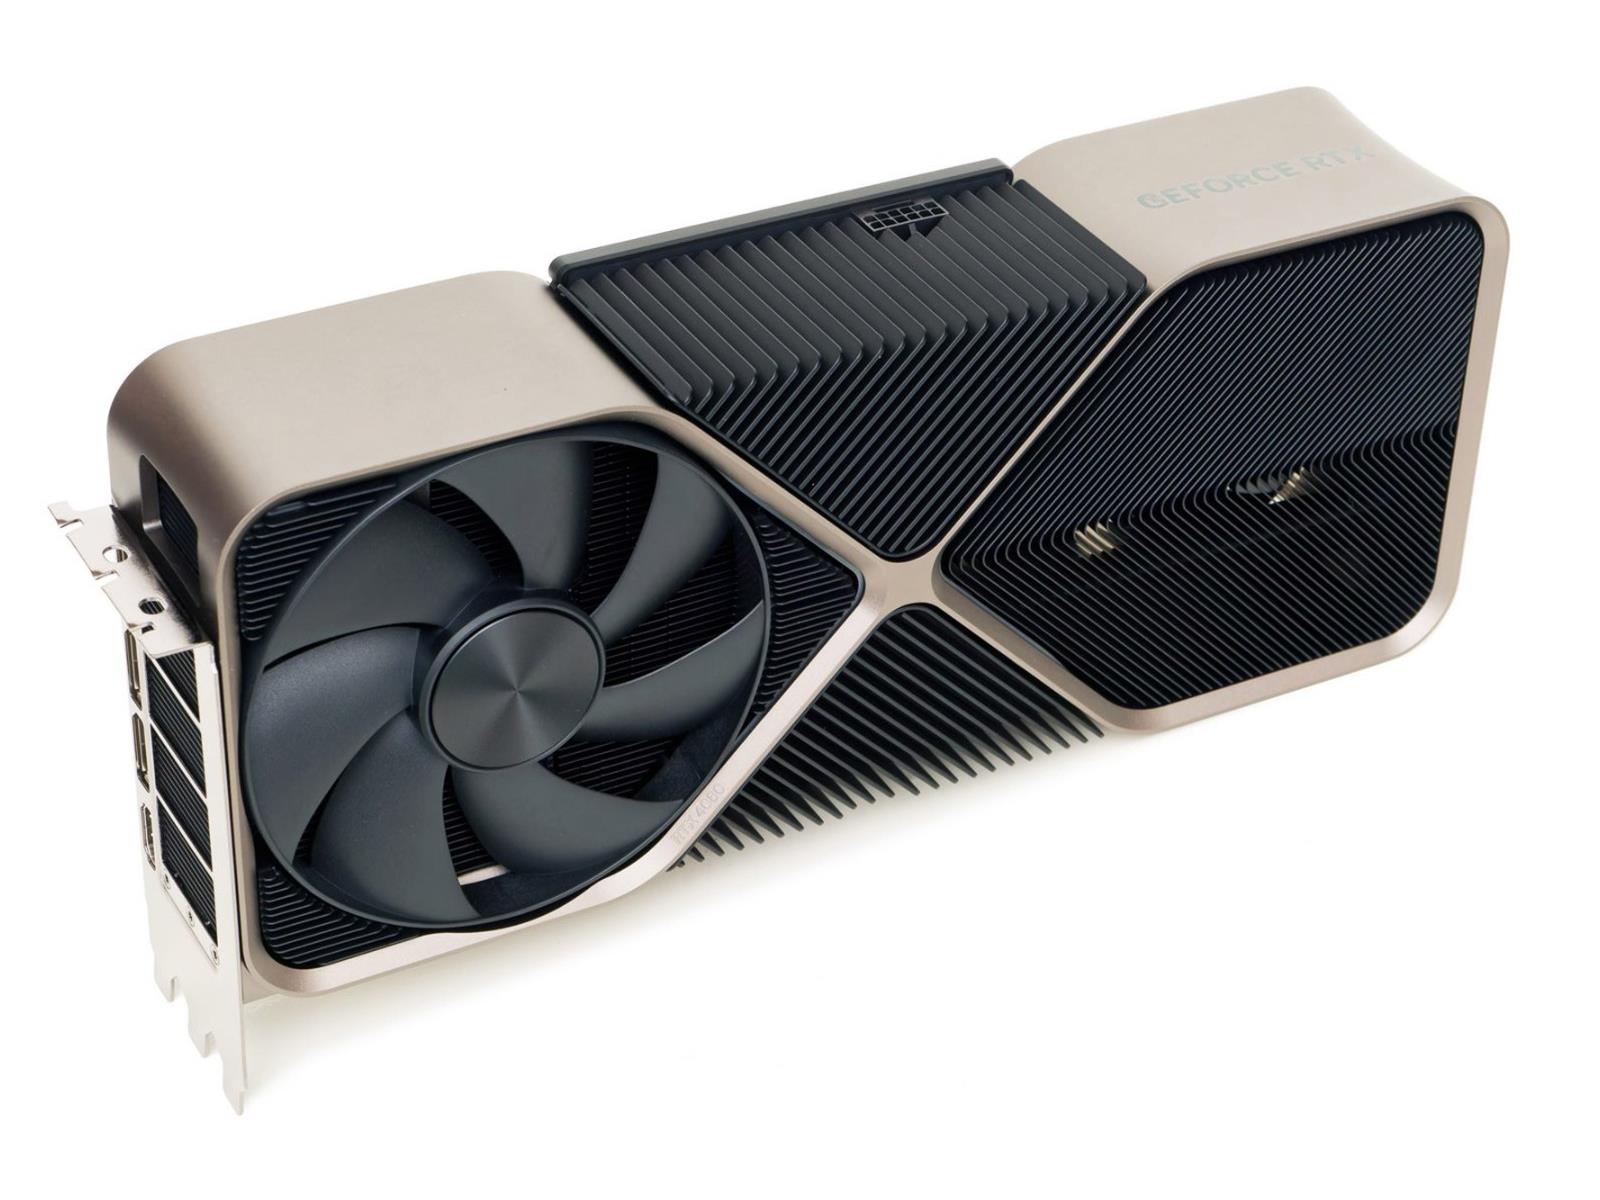 Nvidia GeForce RTX 4080 Founders Edition review: I am the one and